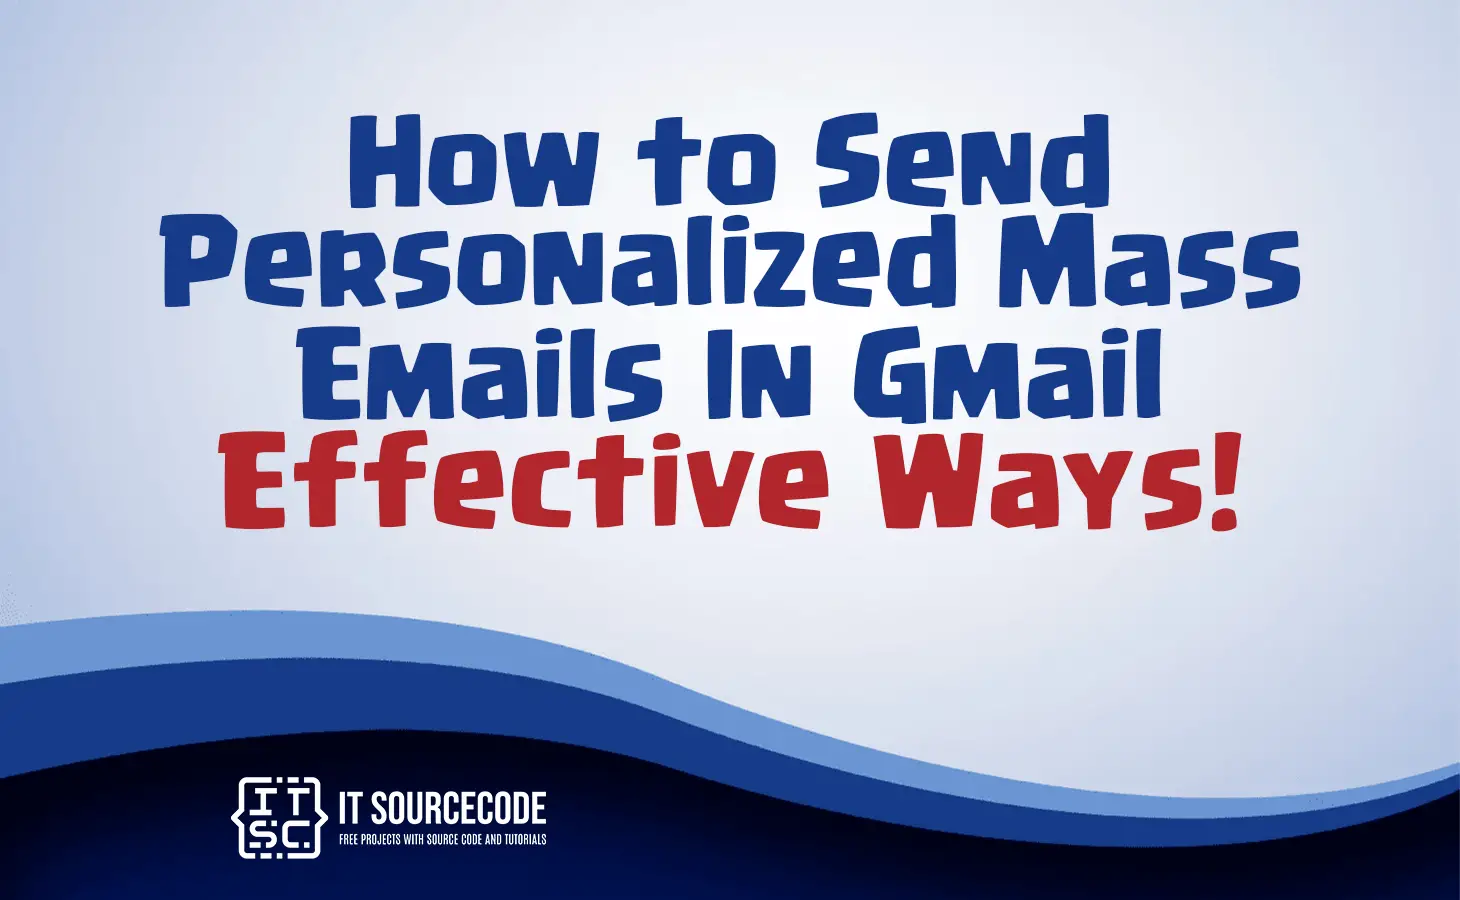 How To Send Personalized Mass Emails In Gmail Effective Ways 8680